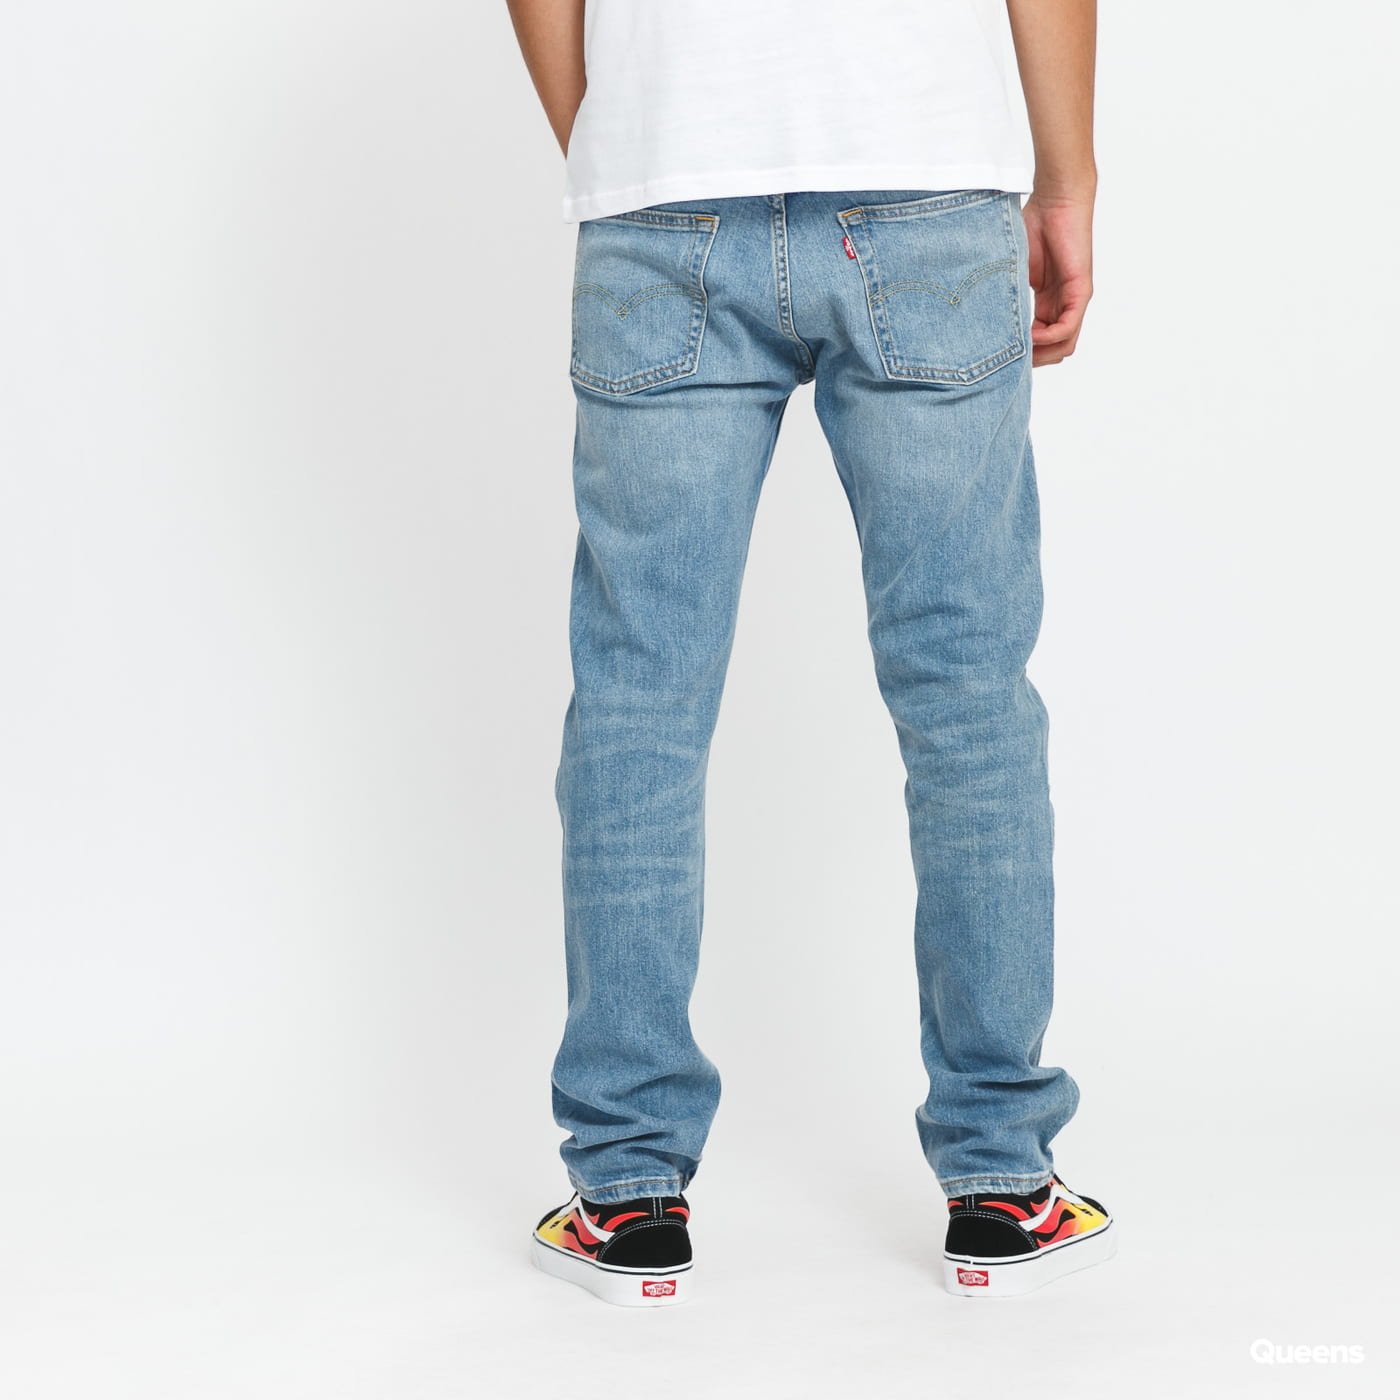 Jeans Levi's 513 Slim Straight Fit worn to ride adv 08513-0933